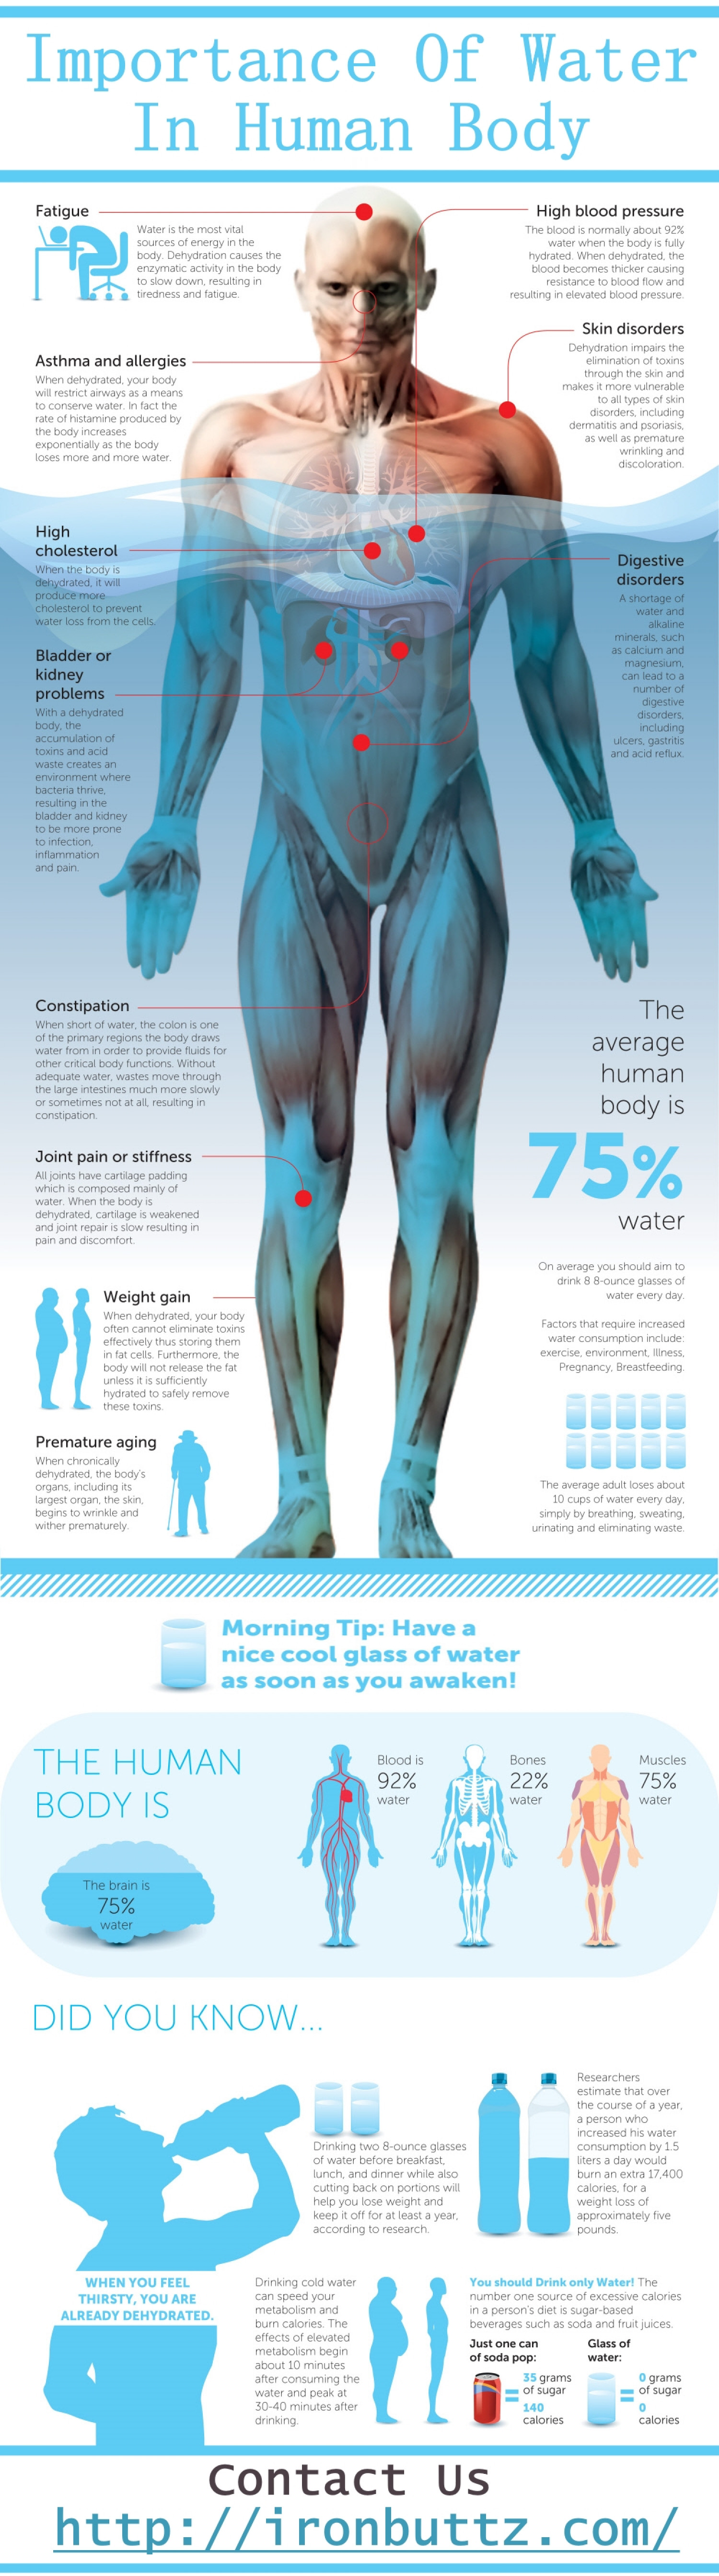 What is the importance of water in the human body?